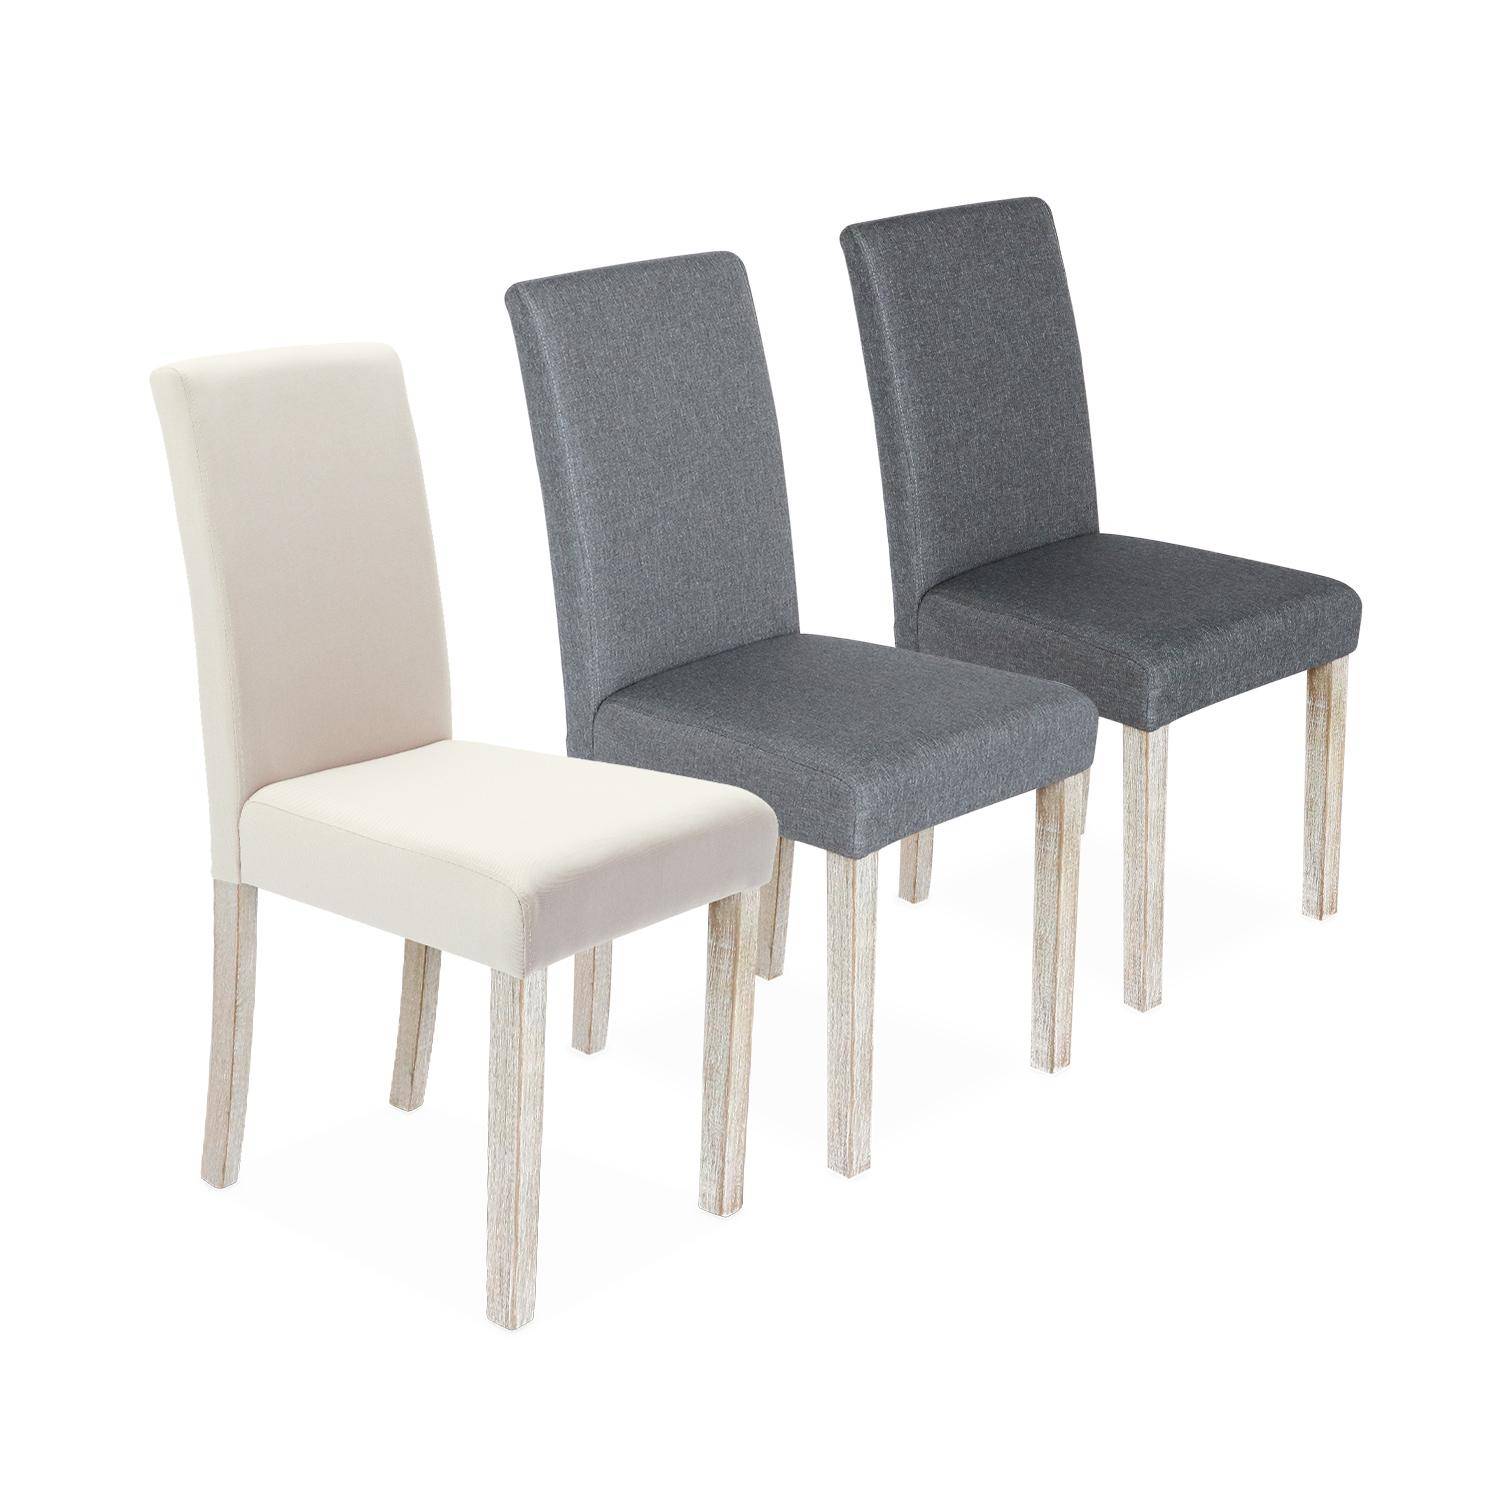 Set of 4 fabric dining chairs with wooden legs - Rita - Charcoal grey,sweeek,Photo6